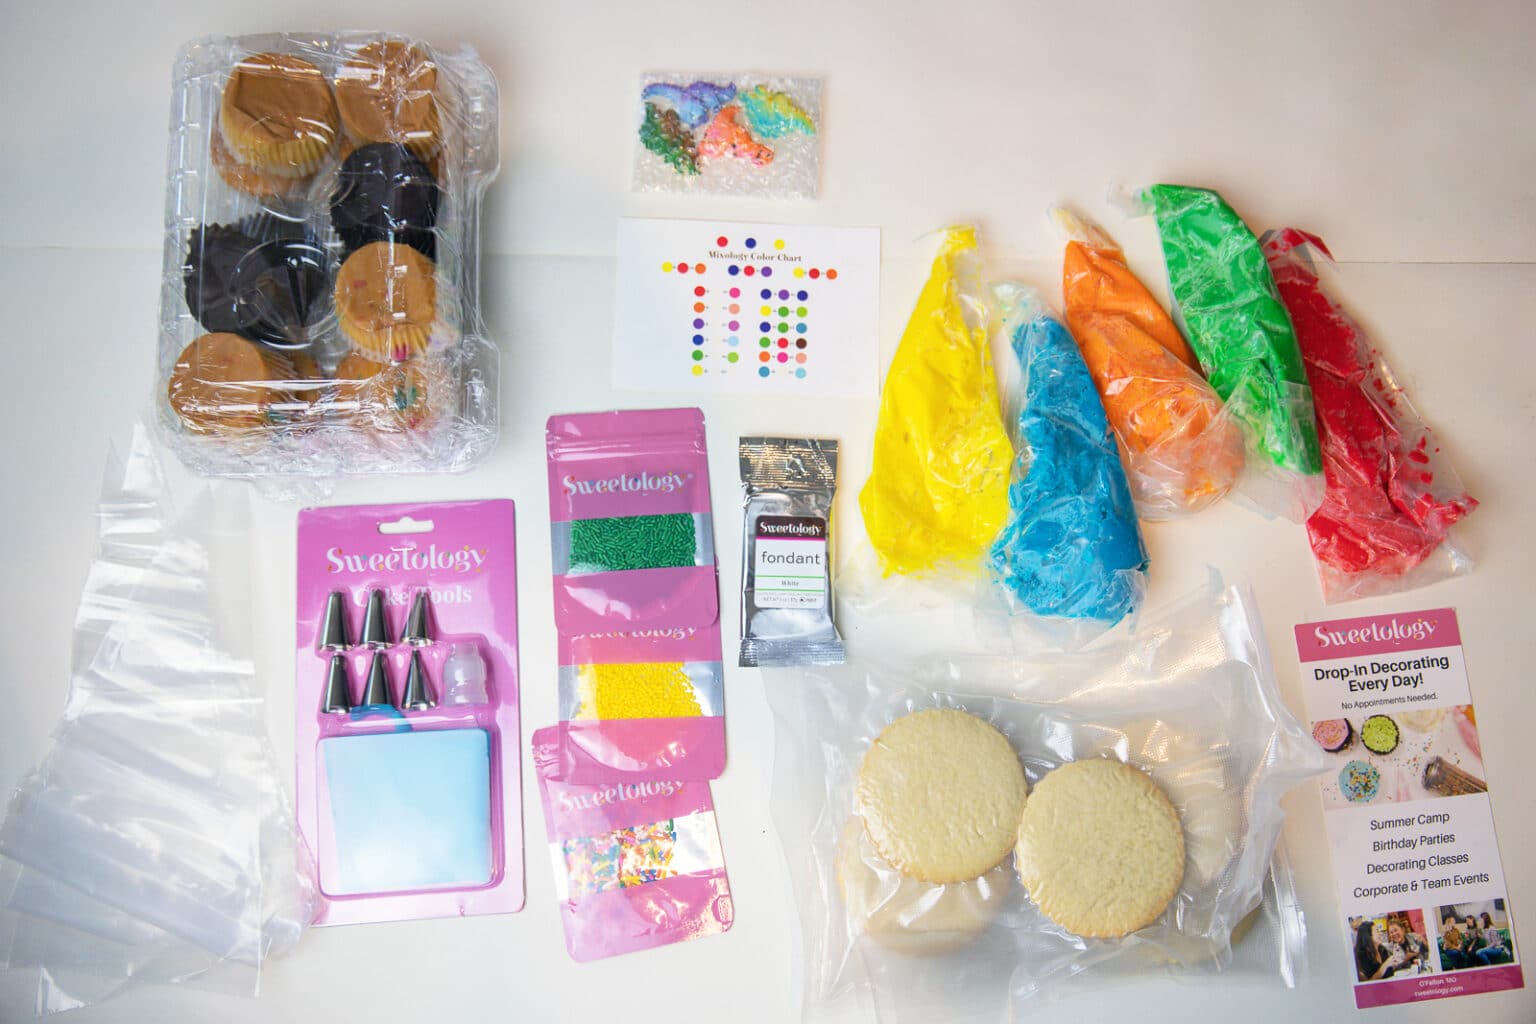 Everything that came in our Sweetology cupcake and sugar cookie decorating kits for our party